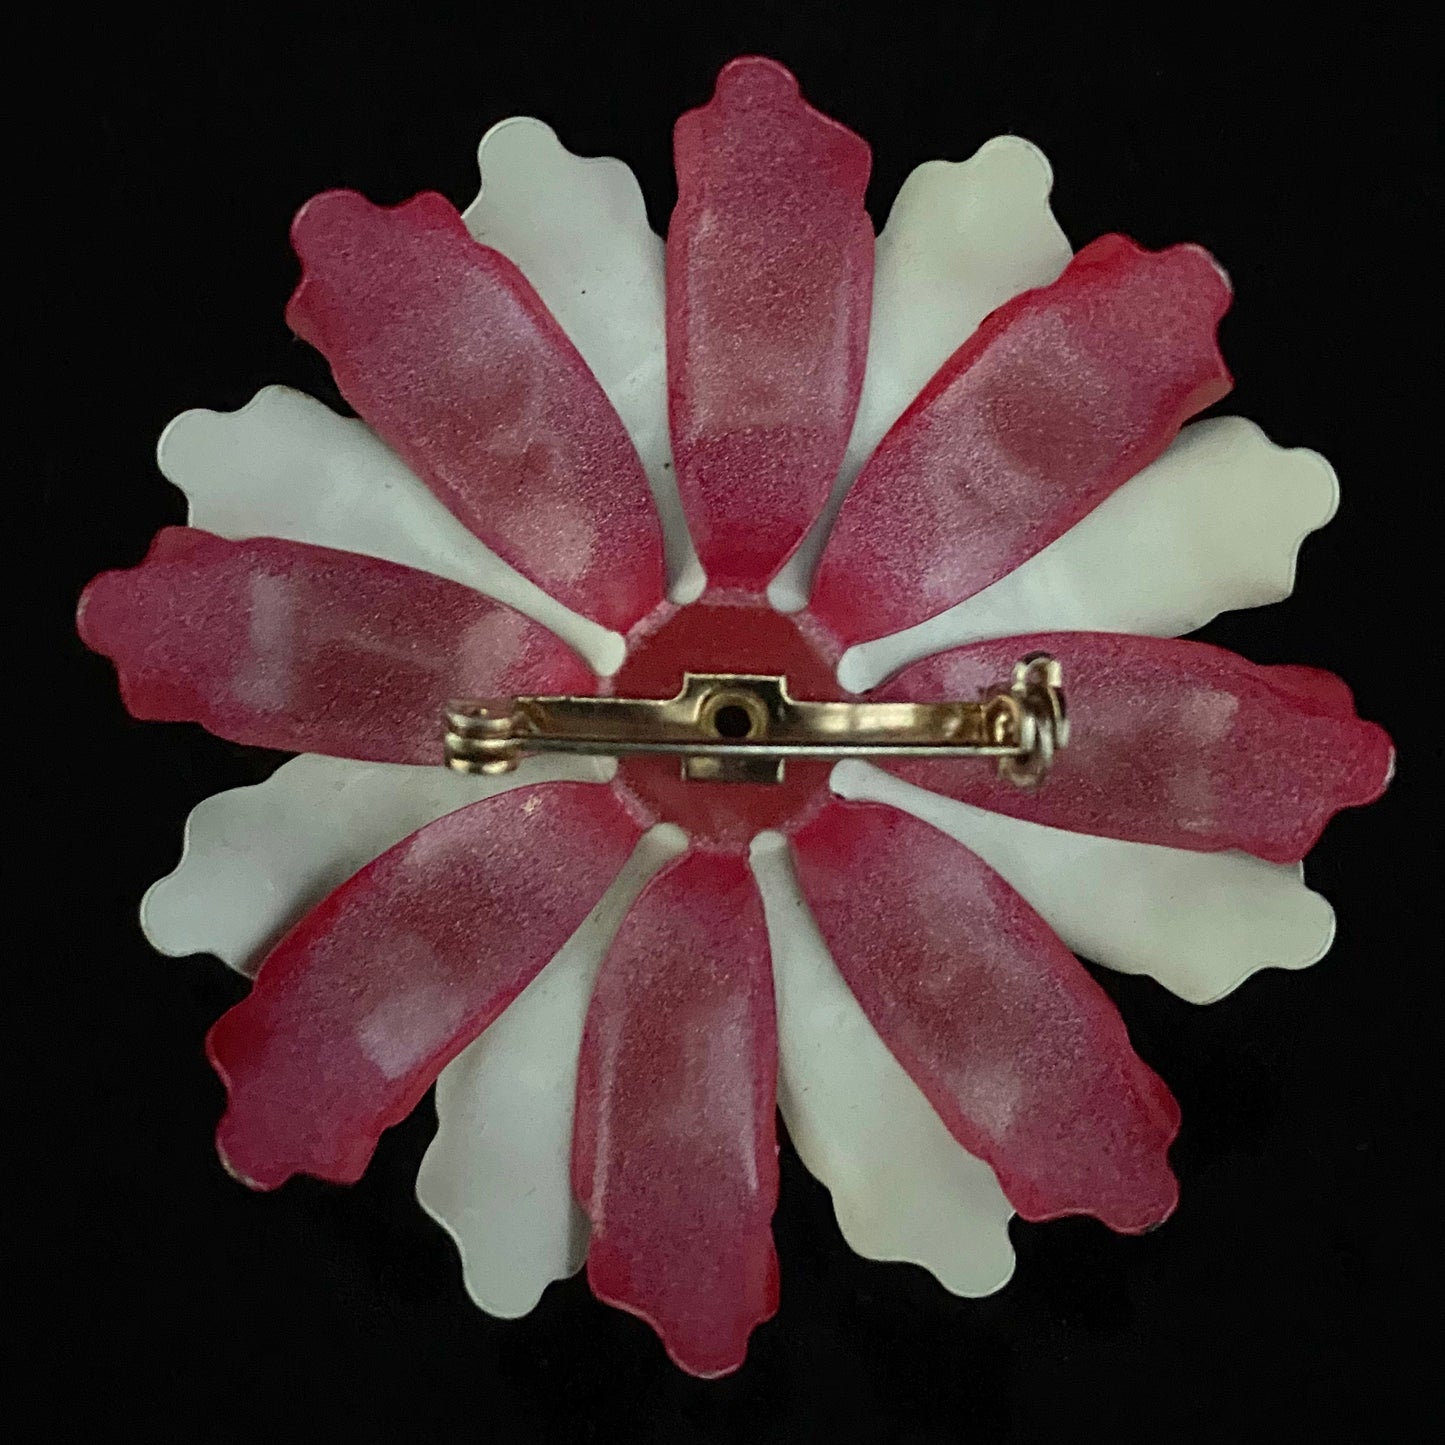 Late 60s/ Early 70s Dome-Shaped Enamel Flower Brooch - Retro Kandy Vintage